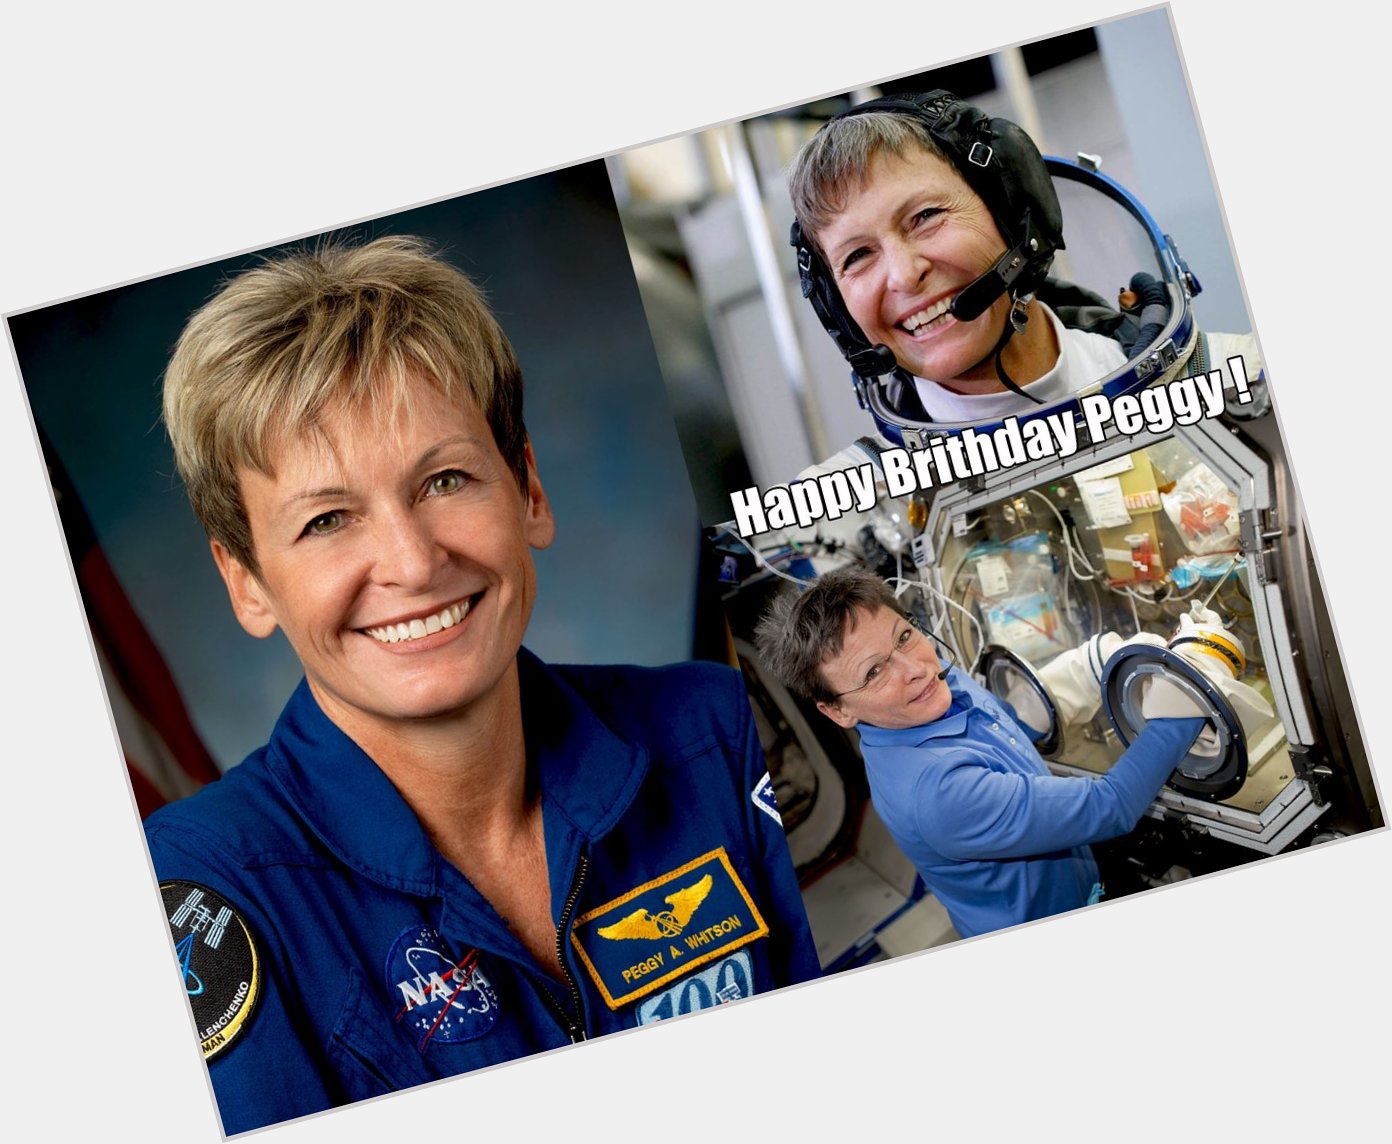 Today, February 9th, is the birthday of NASA astronaut Peggy Whitson, Happy Birthday to Peggy.  